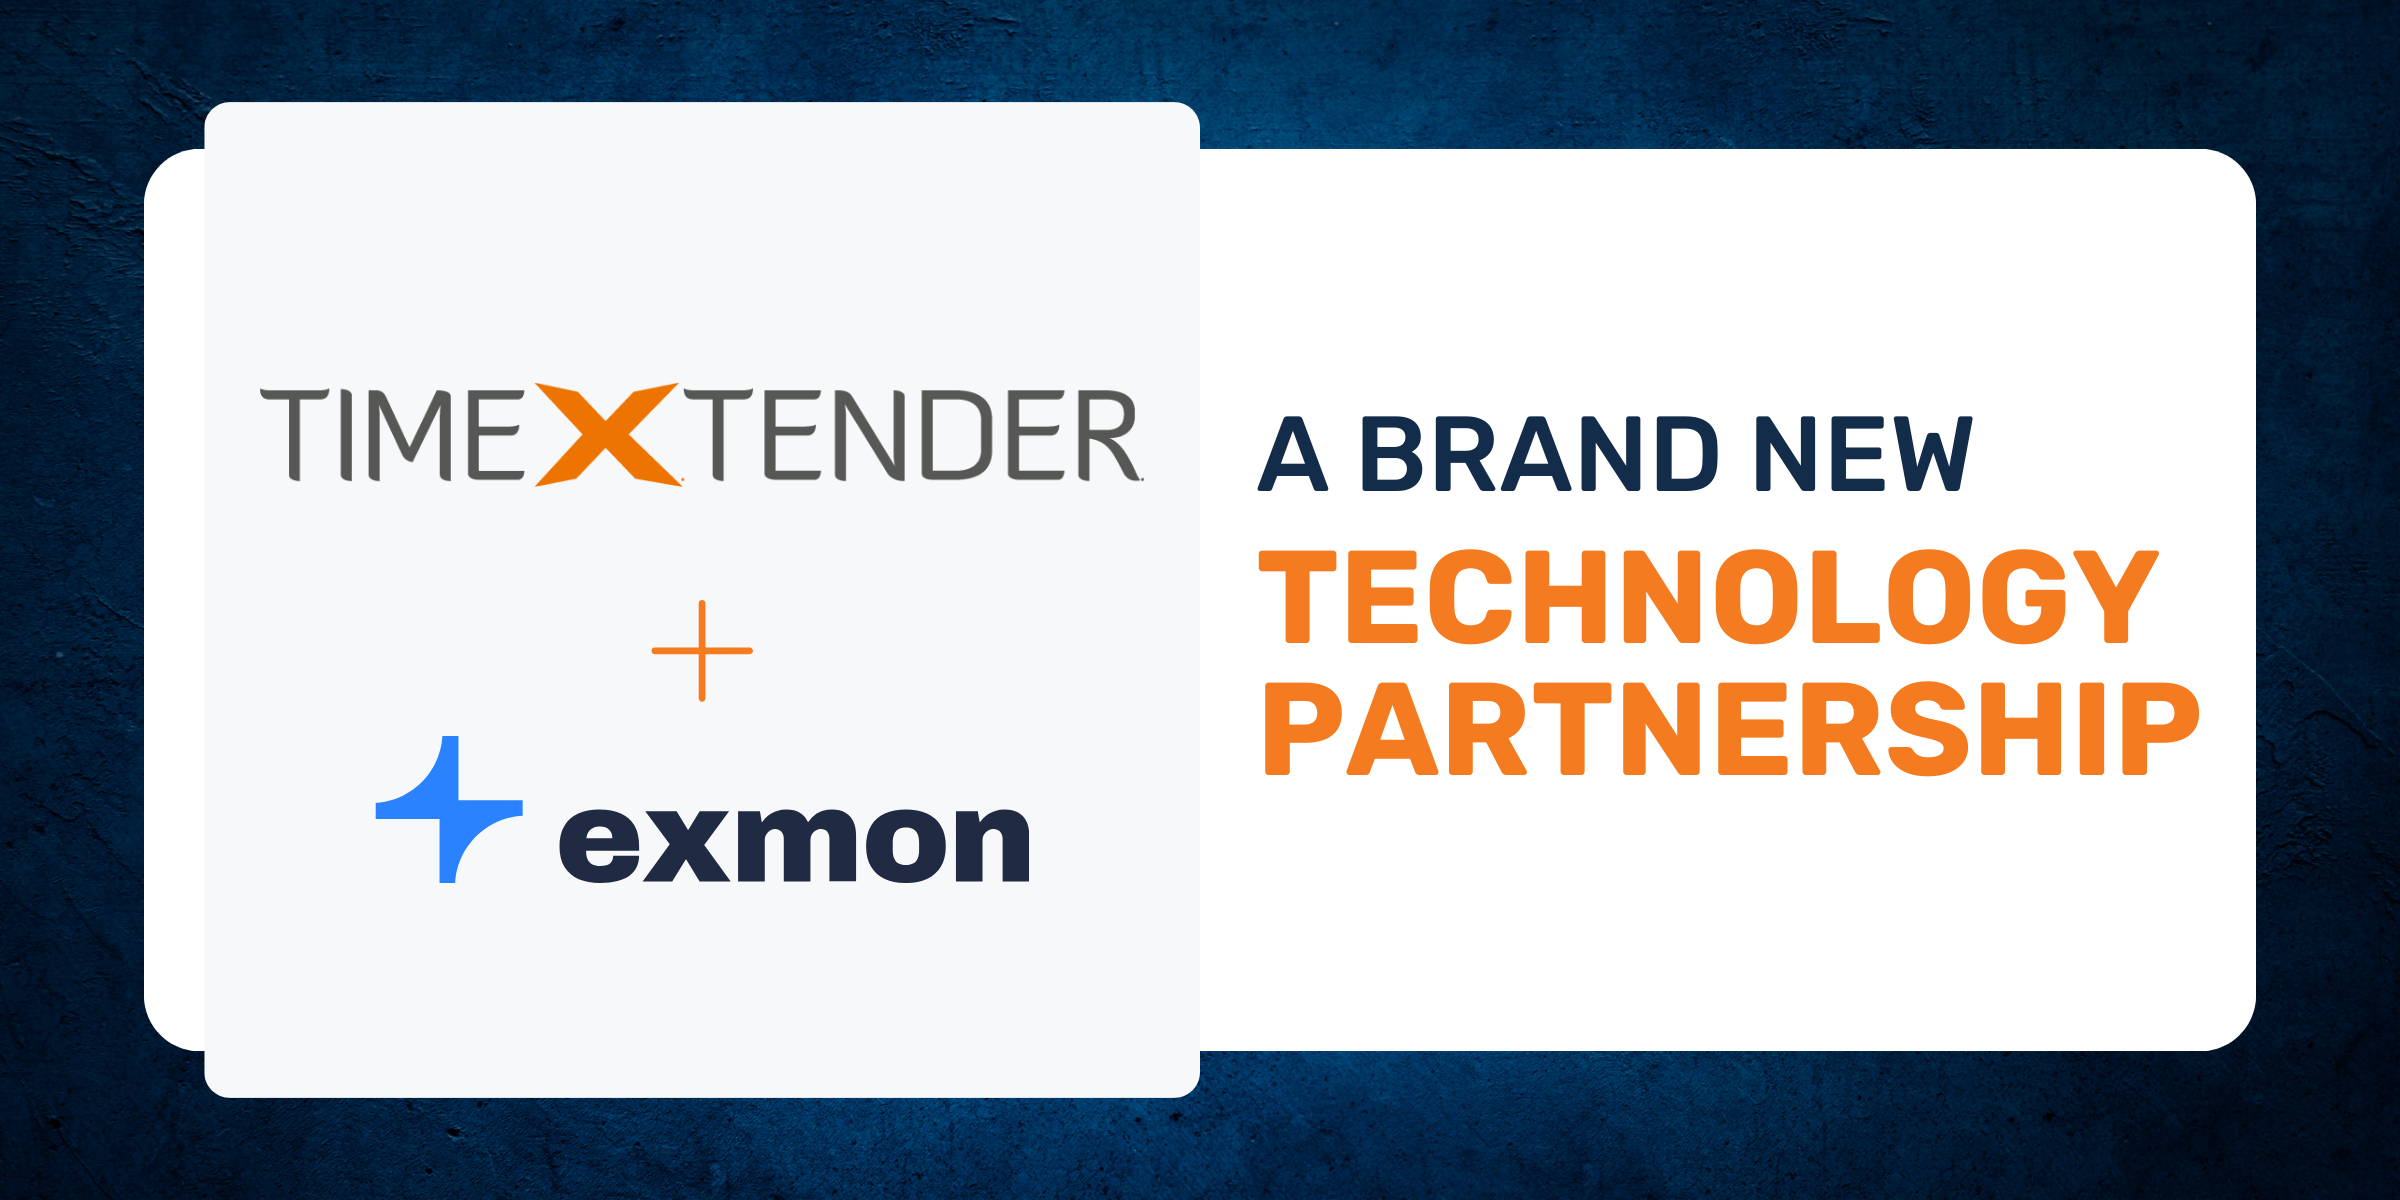 TimeXtender and Exmon: a Brand New Technology Partnership